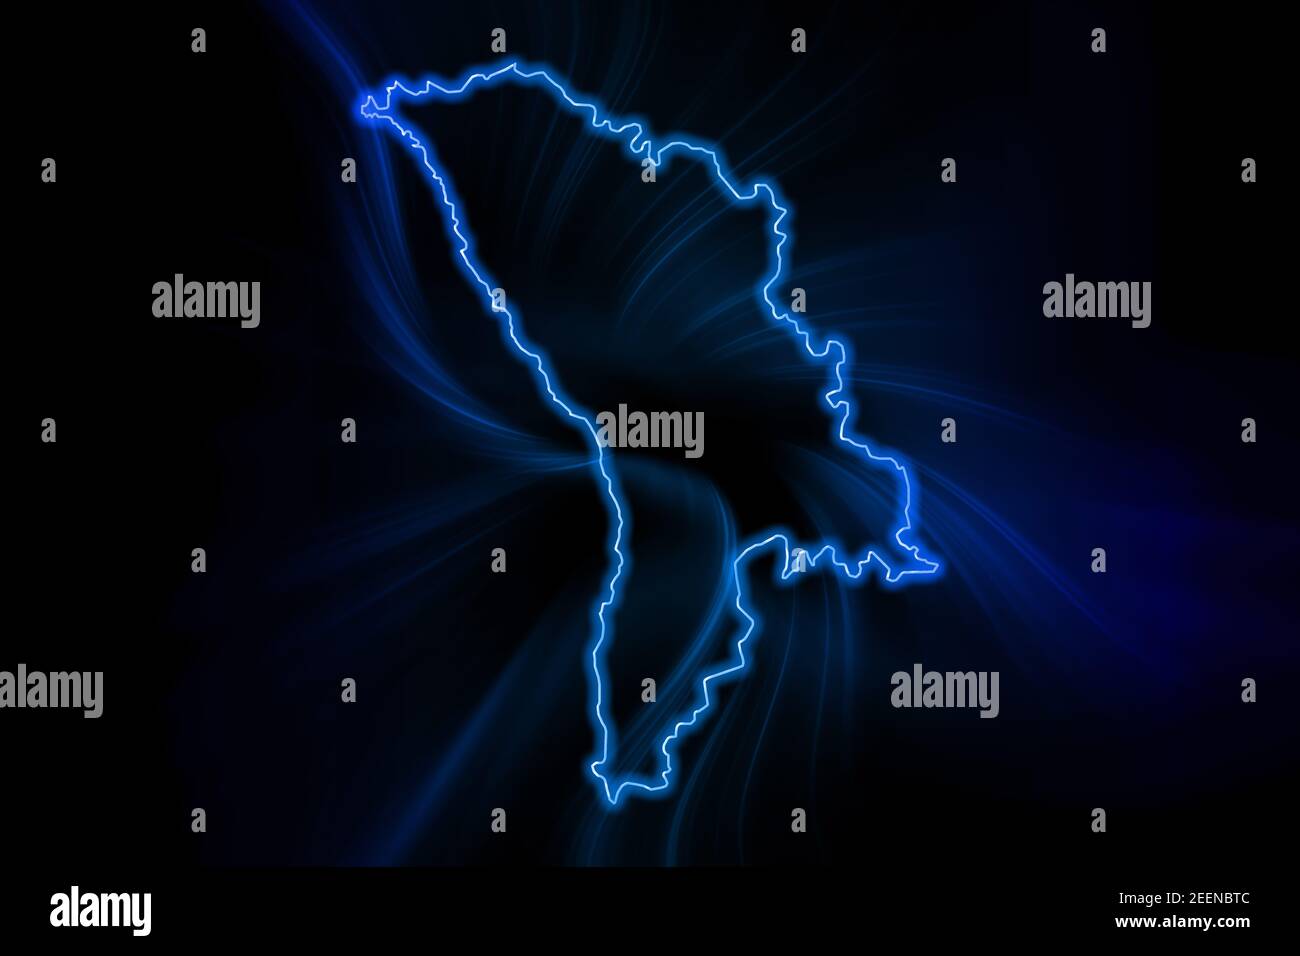 Glowing Map of Moldova, modern blue outline map, on dark Background Stock Photo